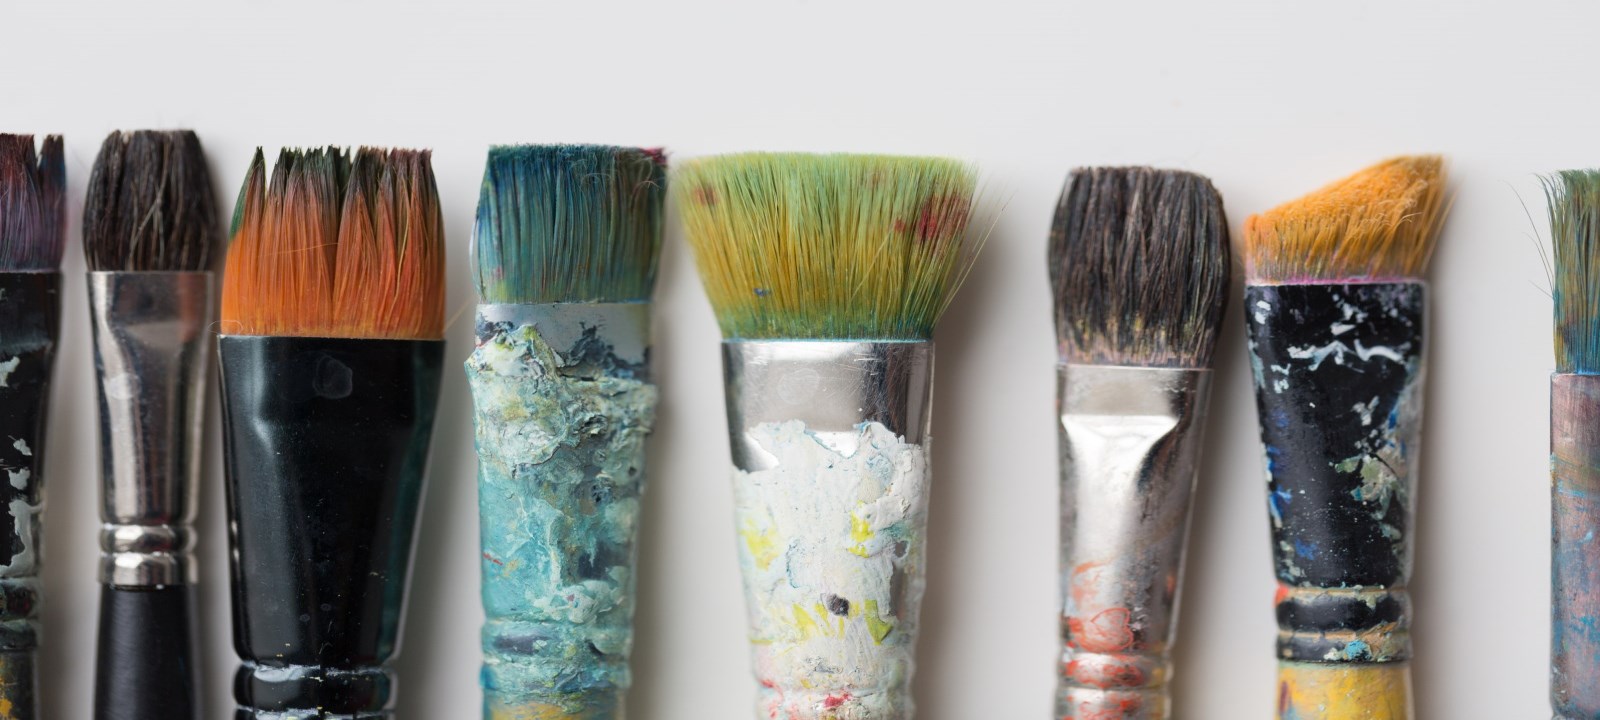 Paint brushes with paint stains